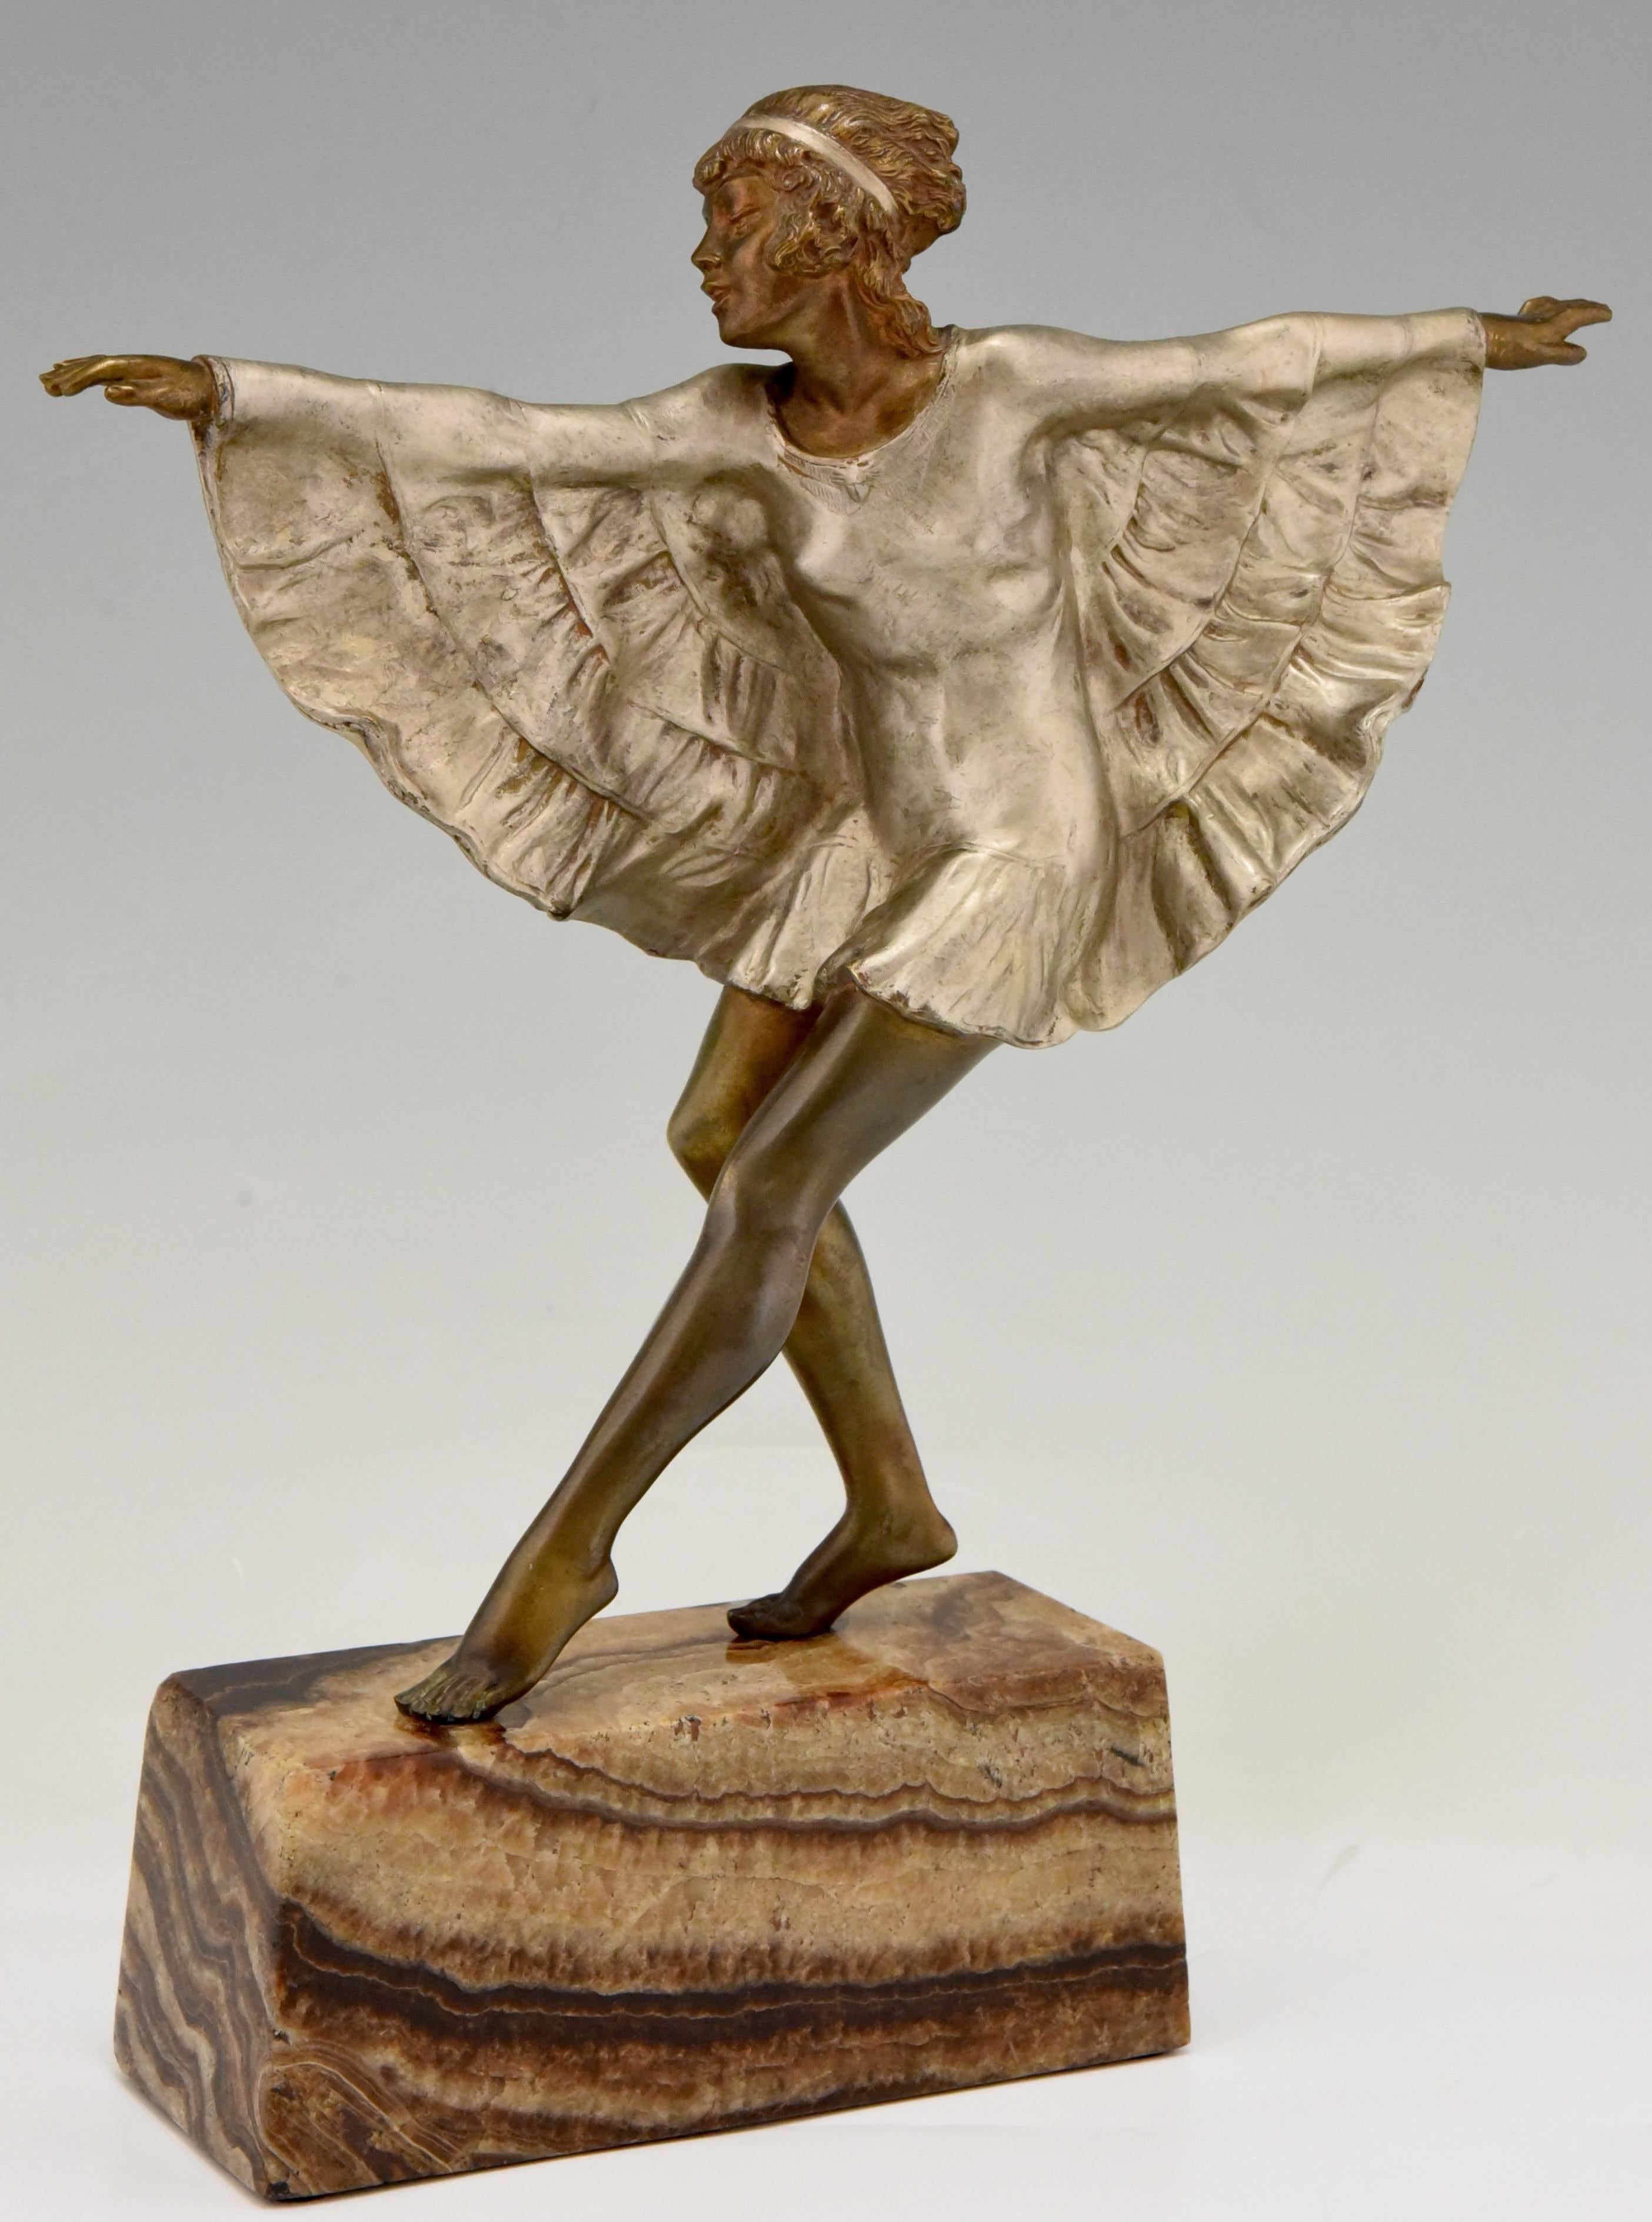 Lovely Art Deco bronze sculpture of a dancer wearing a butterfly dress.
Signed Briand, pseudonym of Marcel André Bouraine.
France, circa 1925.
Patinated bronze on a marble base.
Literature:
“Art Deco and other figures” by Brian Catley. ?“Art